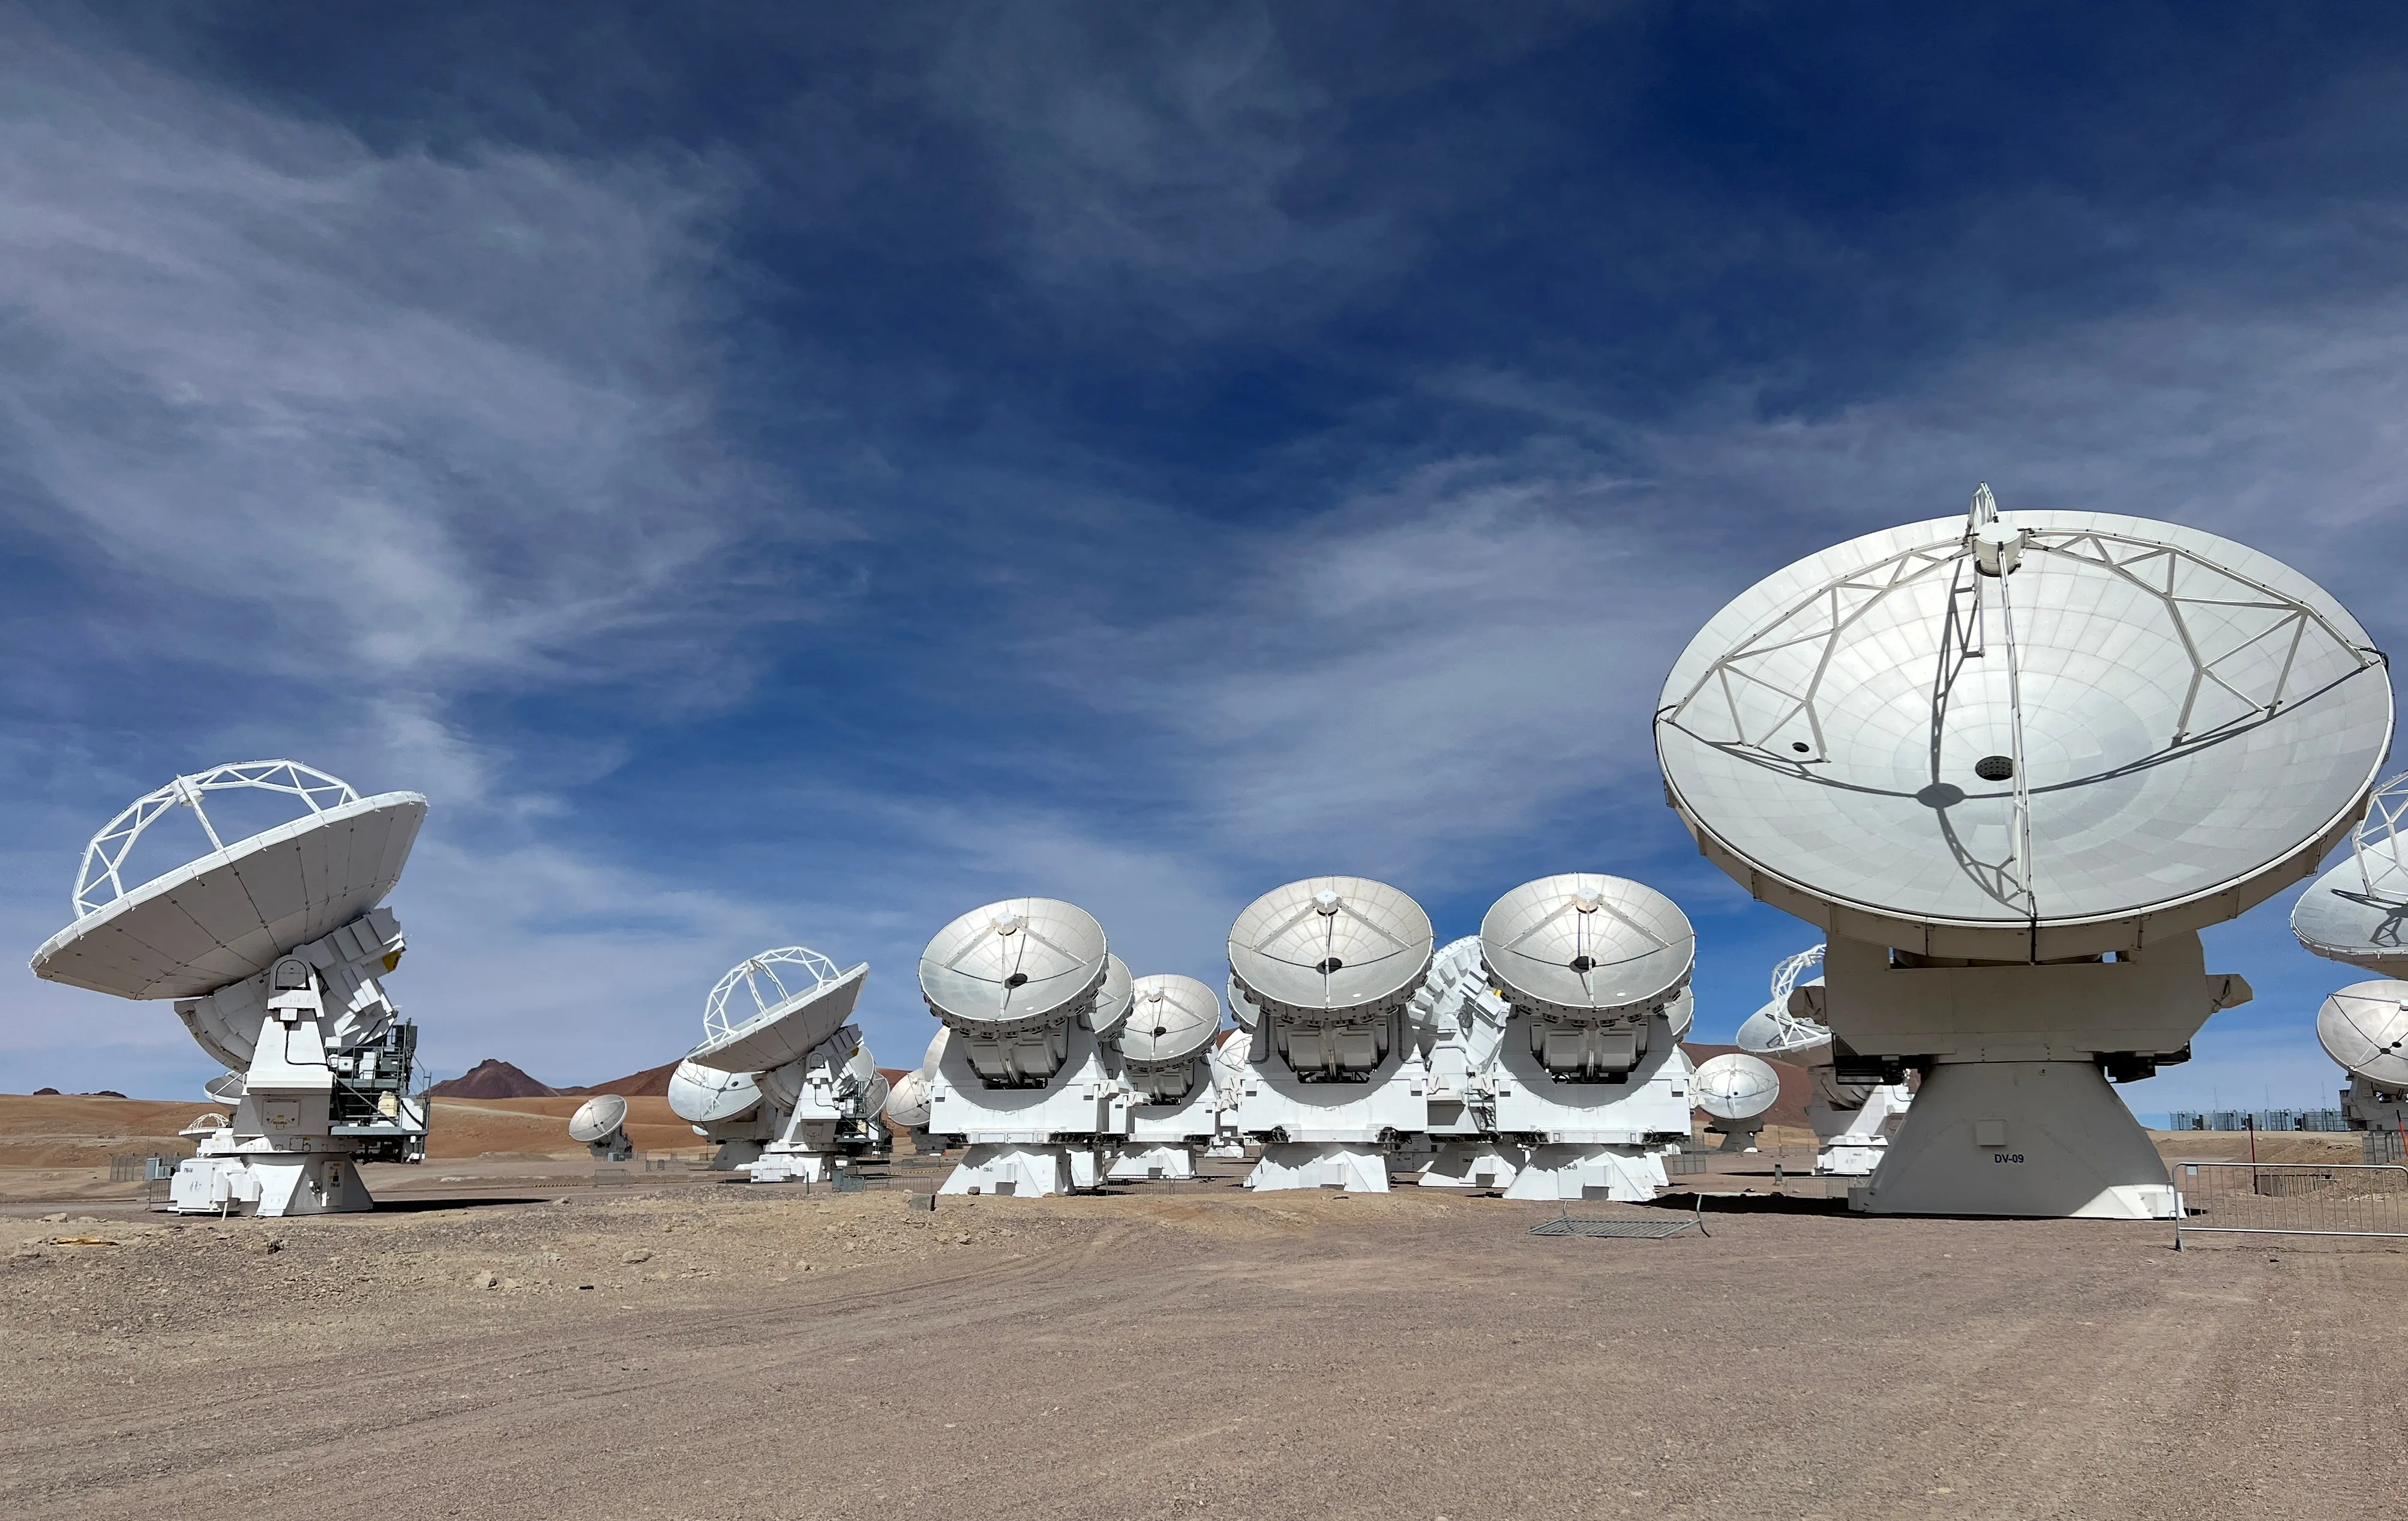 Alma in Chile, South America | Observatories & Planetariums - Rated 4